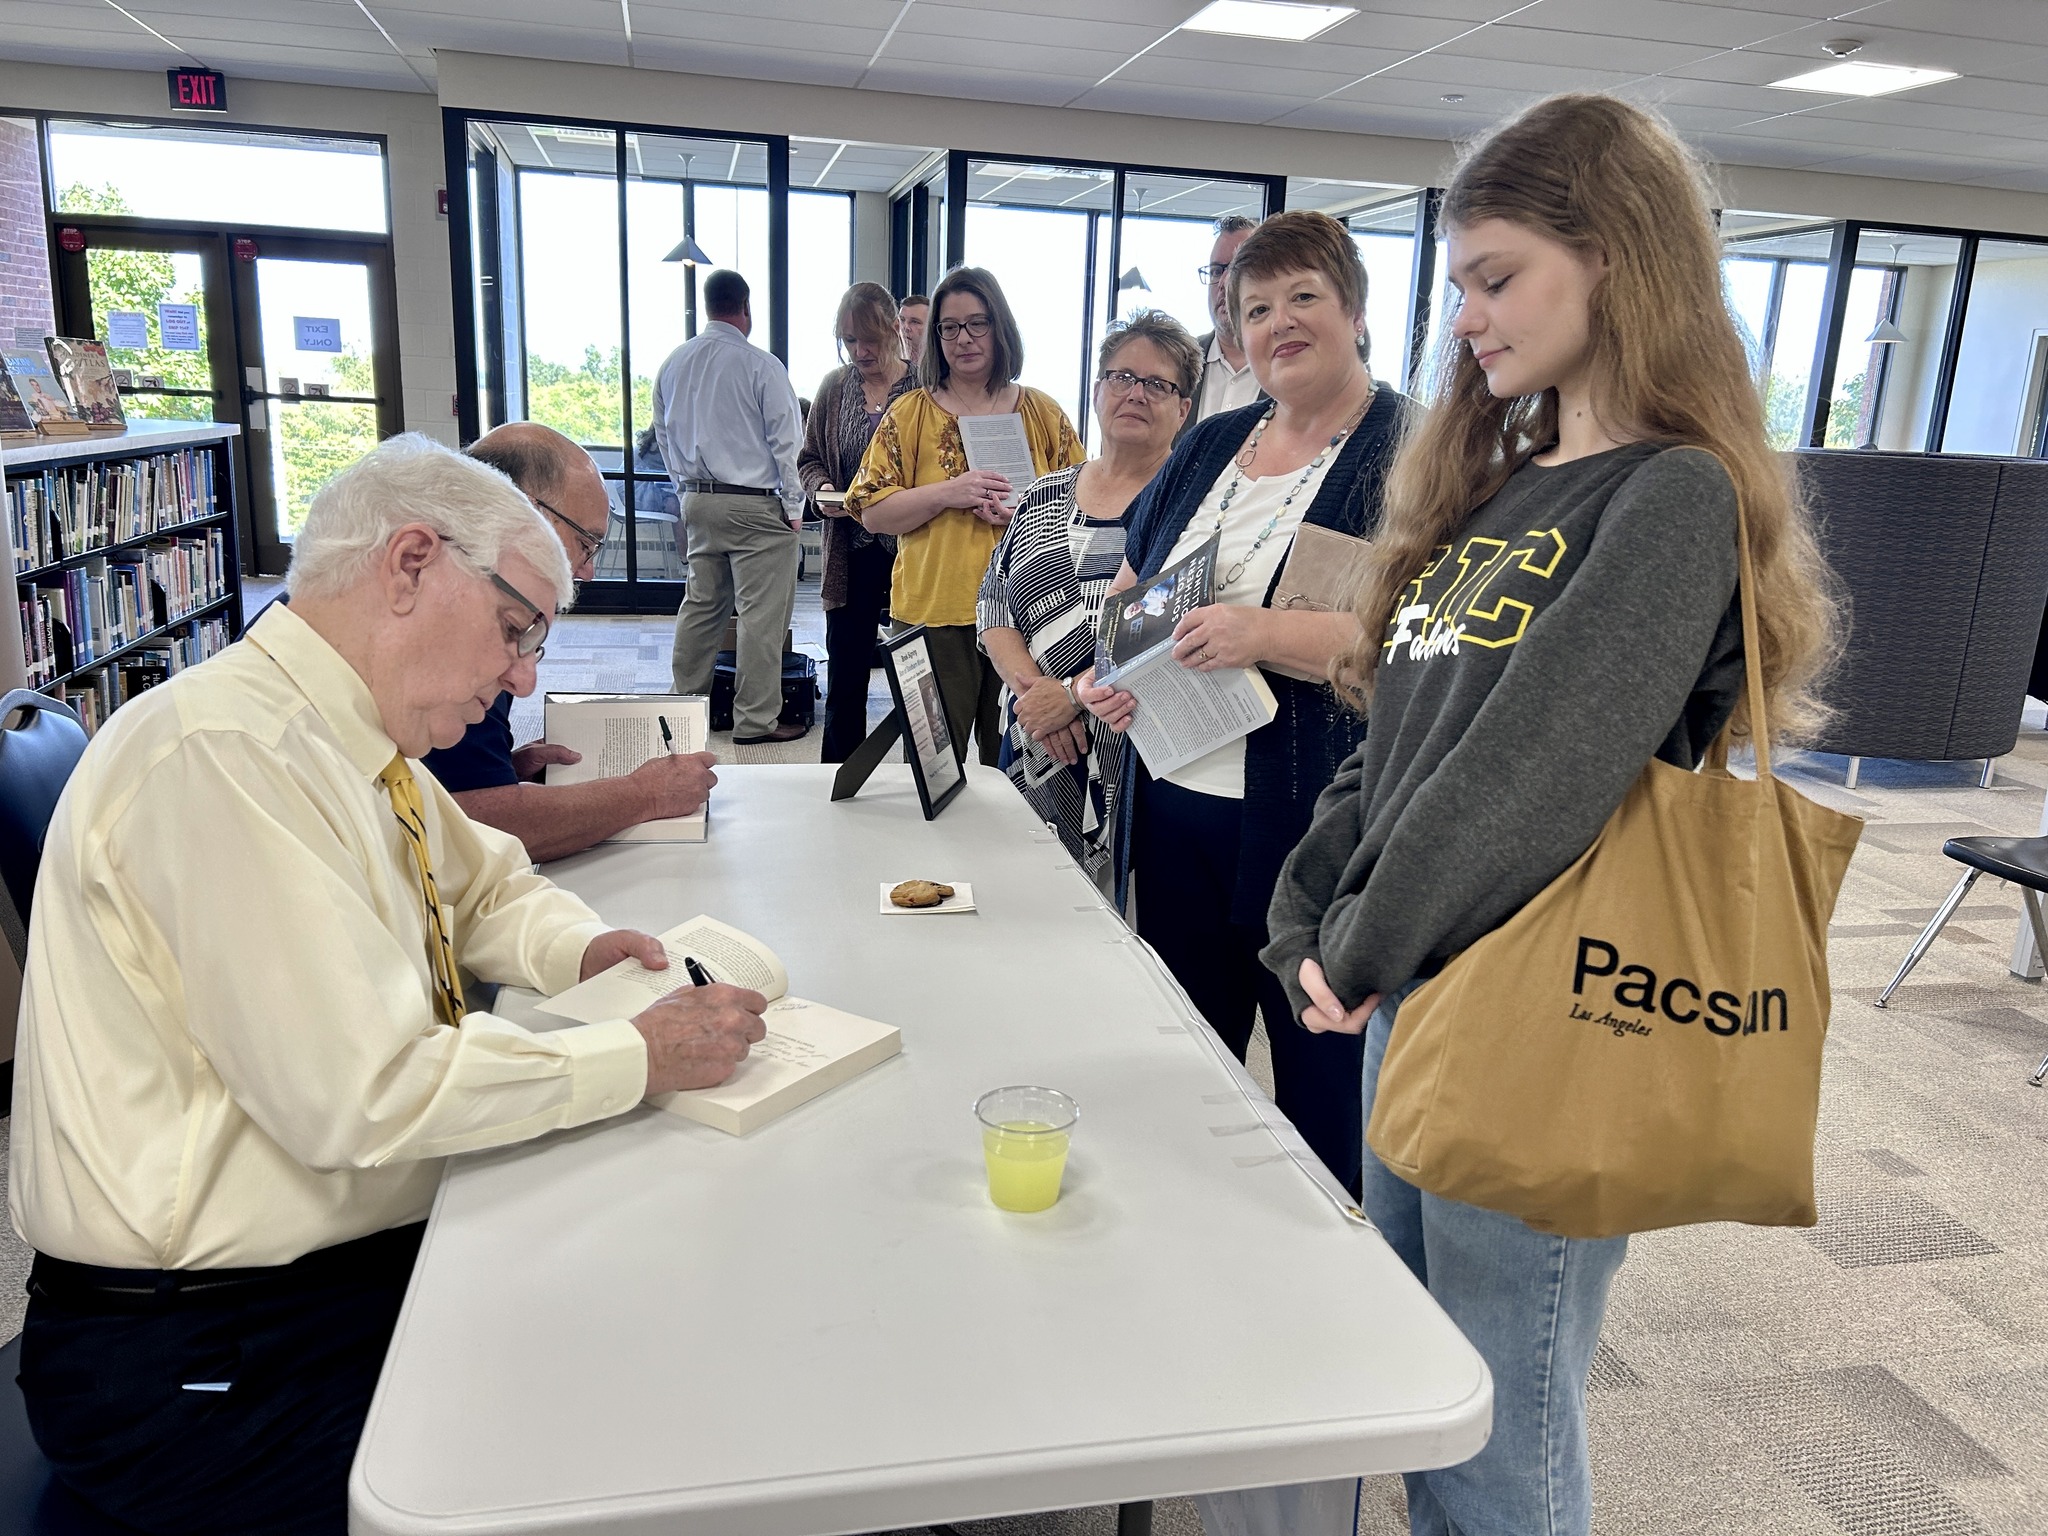 Glenn Poshard visited the Learning Commons today for a signing of his book, 'Son of Southern Illinois.'  While here, he took the time to meet with students, staff, and faculty and discuss some of the struggles, successes, and inspiration in his narrative.